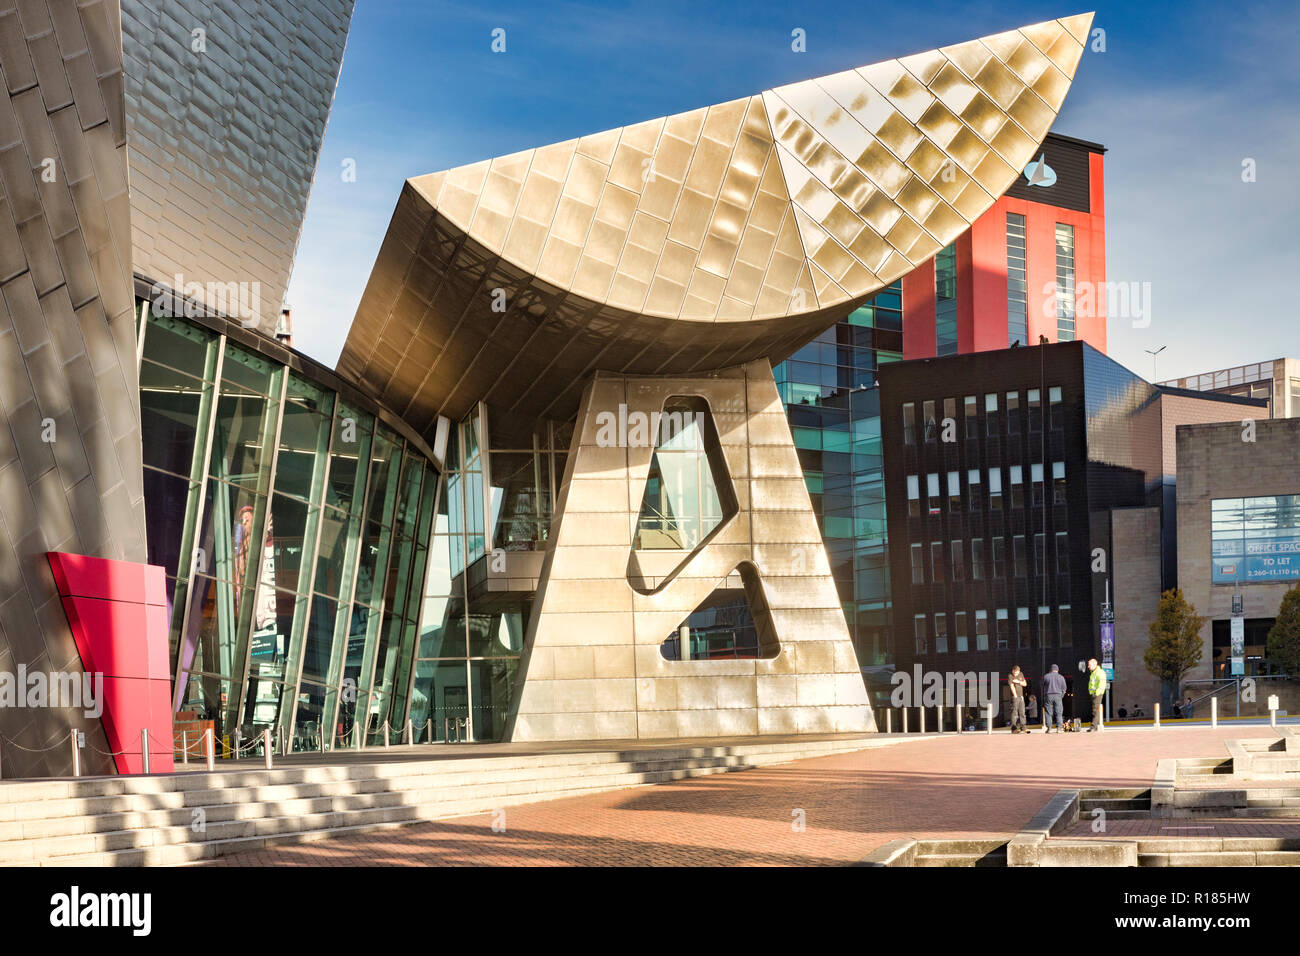 2 November 2018: Salford Quays, Manchester, UK -  The Lowry, the gallery and museum complex celebrating the life of L.S. Lowry. It was designed by... Stock Photo